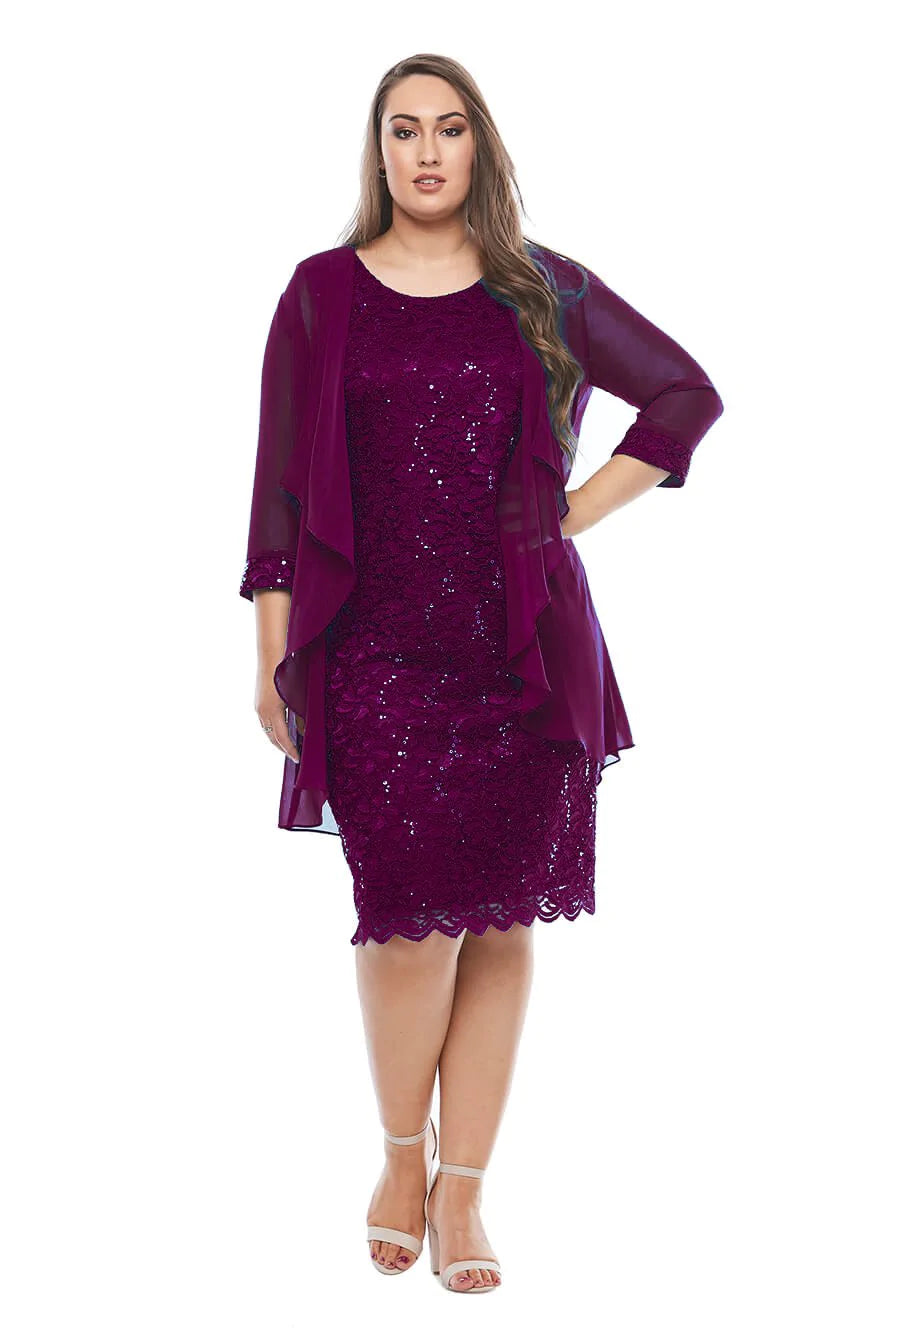 Layla Jones Sequin Lace Dress and Jacket - Mulberry LJ0181